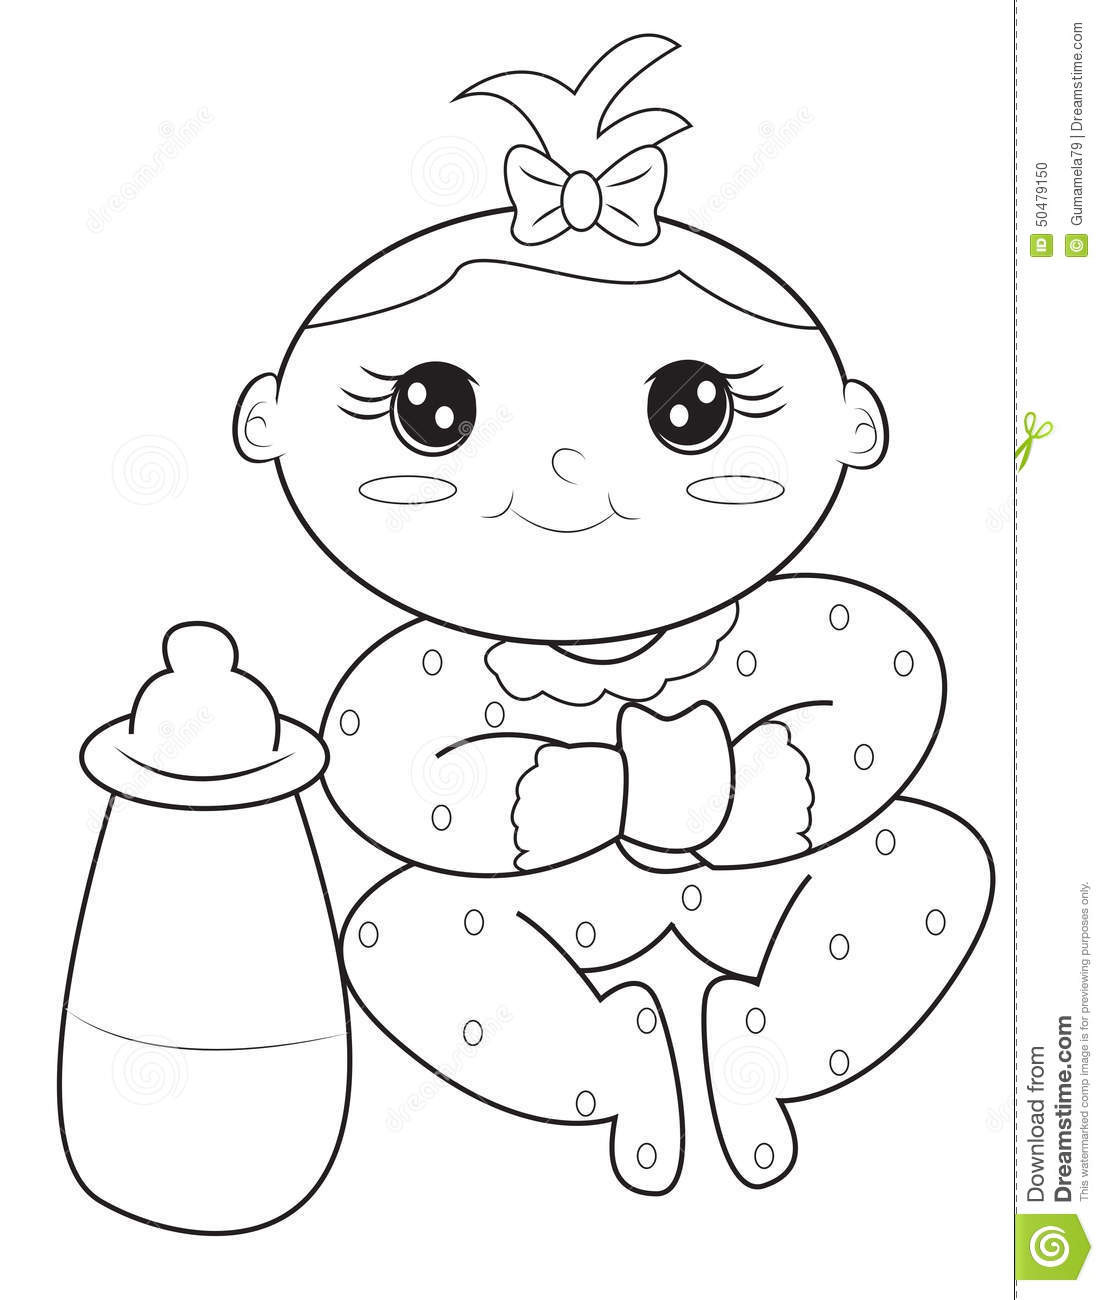 Baby Coloring Pages For Girls
 Coloring Pages For Baby Girls – Color Bros